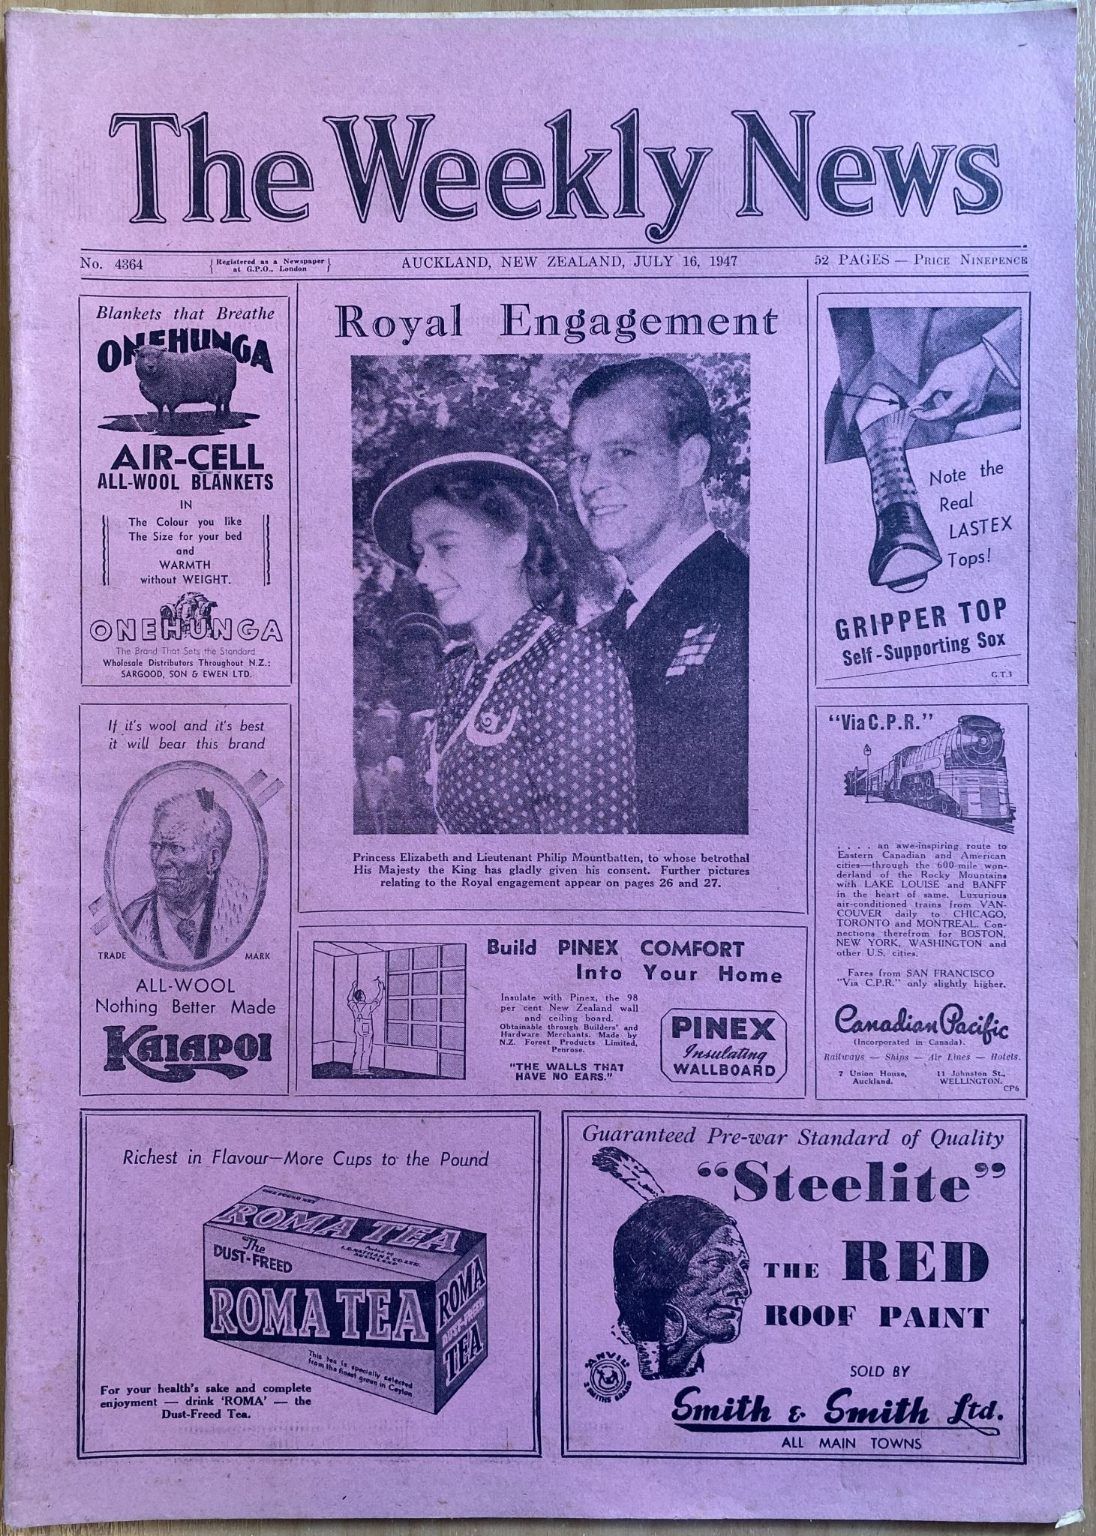 OLD NEWSPAPER: The Weekly News, No. 4364, 16 July 1947